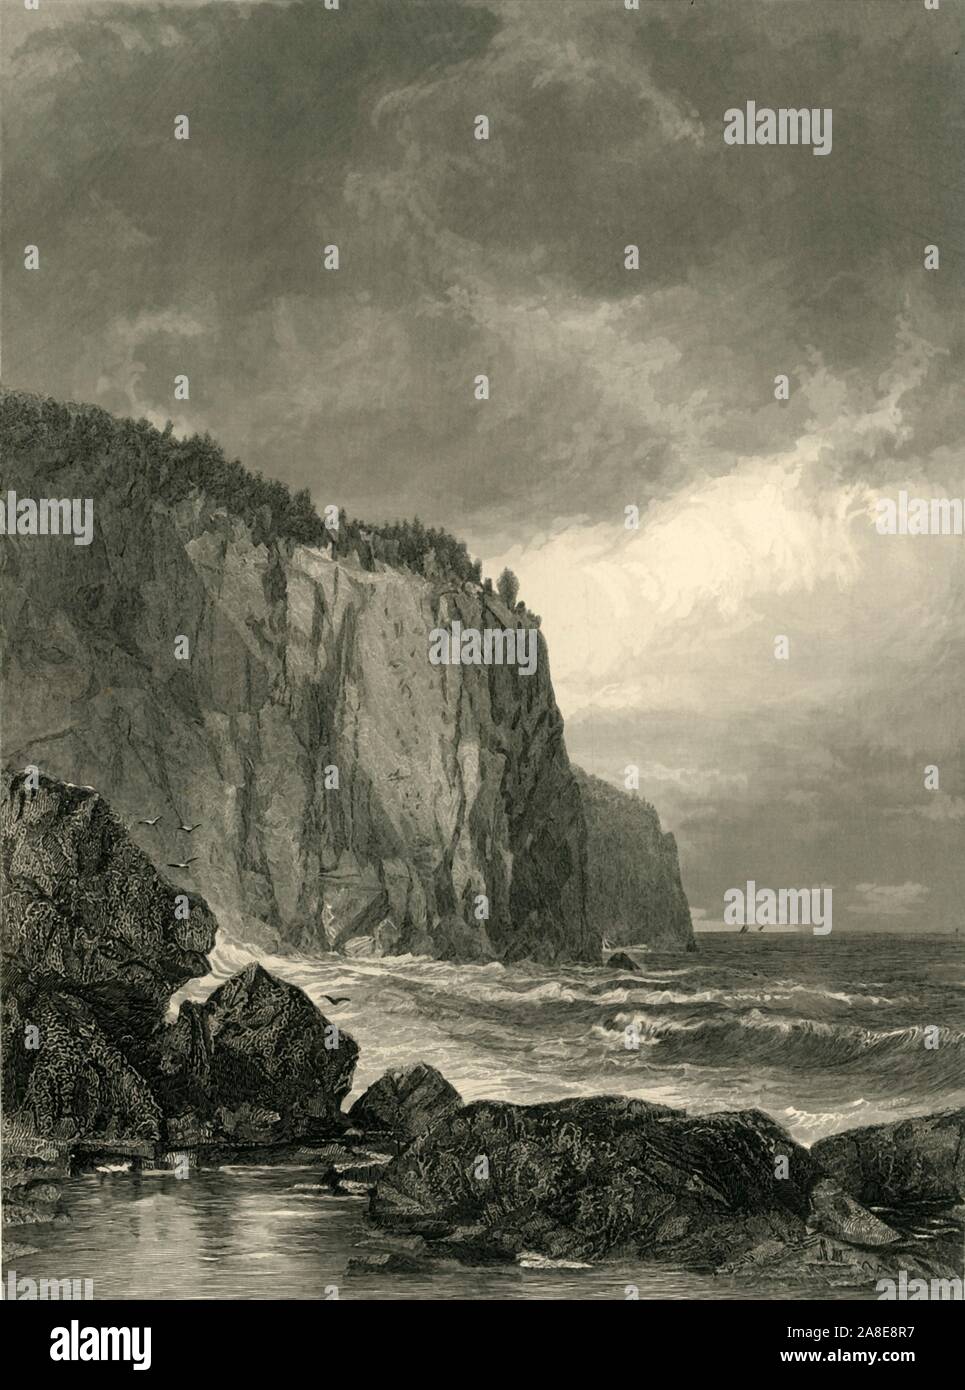 'Lake Superior, (Entrance to Baptism Bay)', 1872. View of the shore of Lake Superior where the Baptism River empties into it, Minnesota, USA. From &quot;Picturesque America; or, The Land We Live In, A Delineation by Pen and Pencil of the Mountains, Rivers, Lakes...with Illustrations on Steel and Wood by Eminent American Artists&quot; Vol. I, edited by William Cullen Bryant. [D. Appleton and Company, New York, 1872] Stock Photo